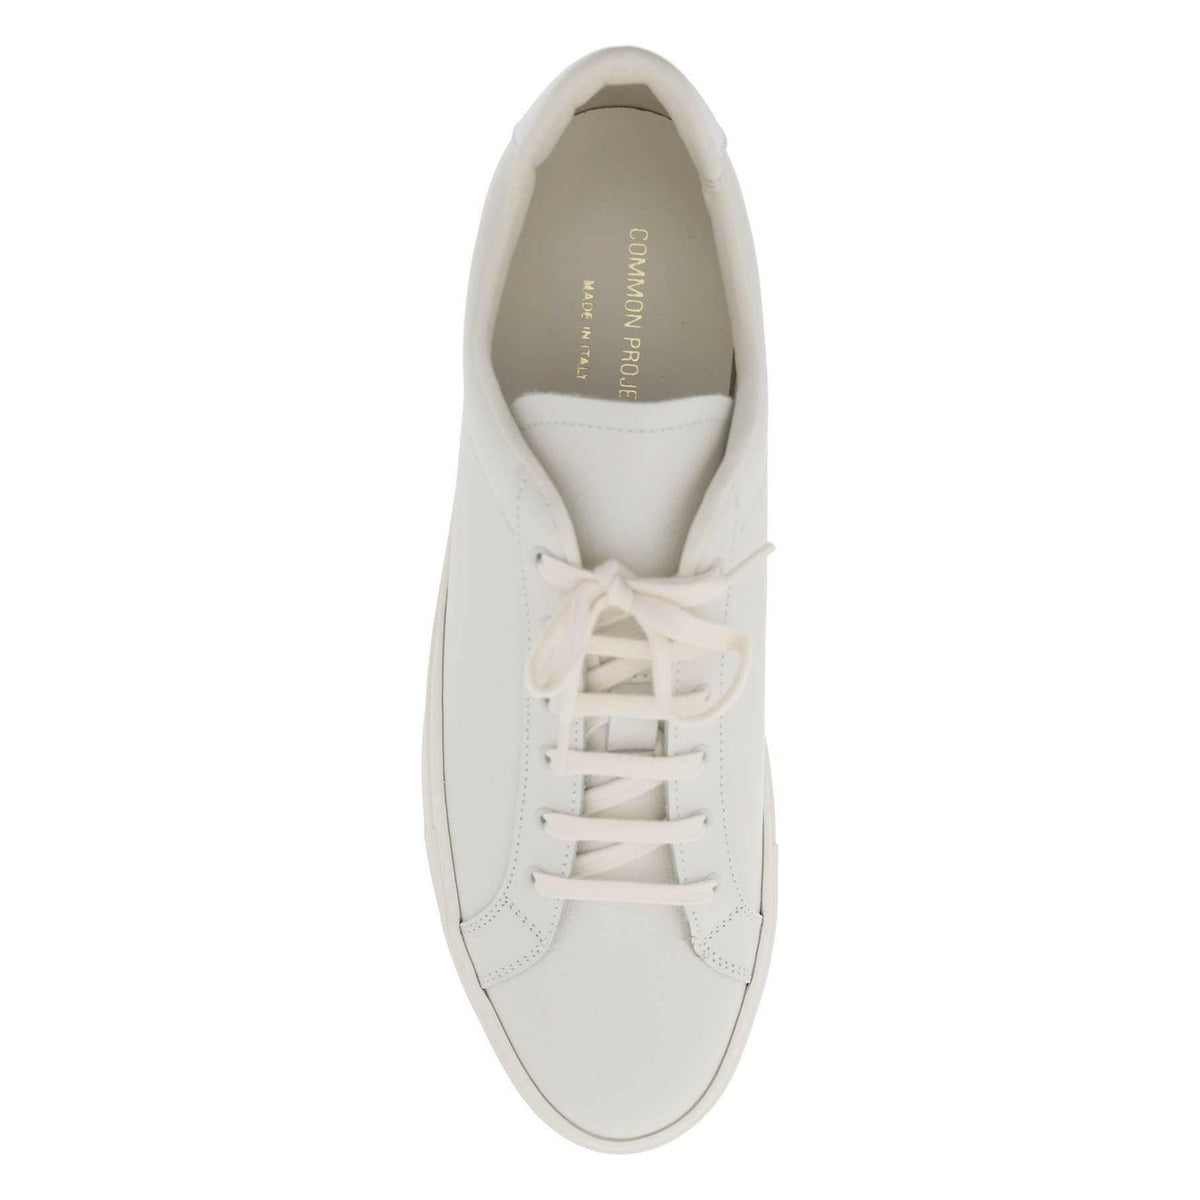 COMMON PROJECTS - Vintage White Retro Low-Top Leather Sneakers - JOHN JULIA